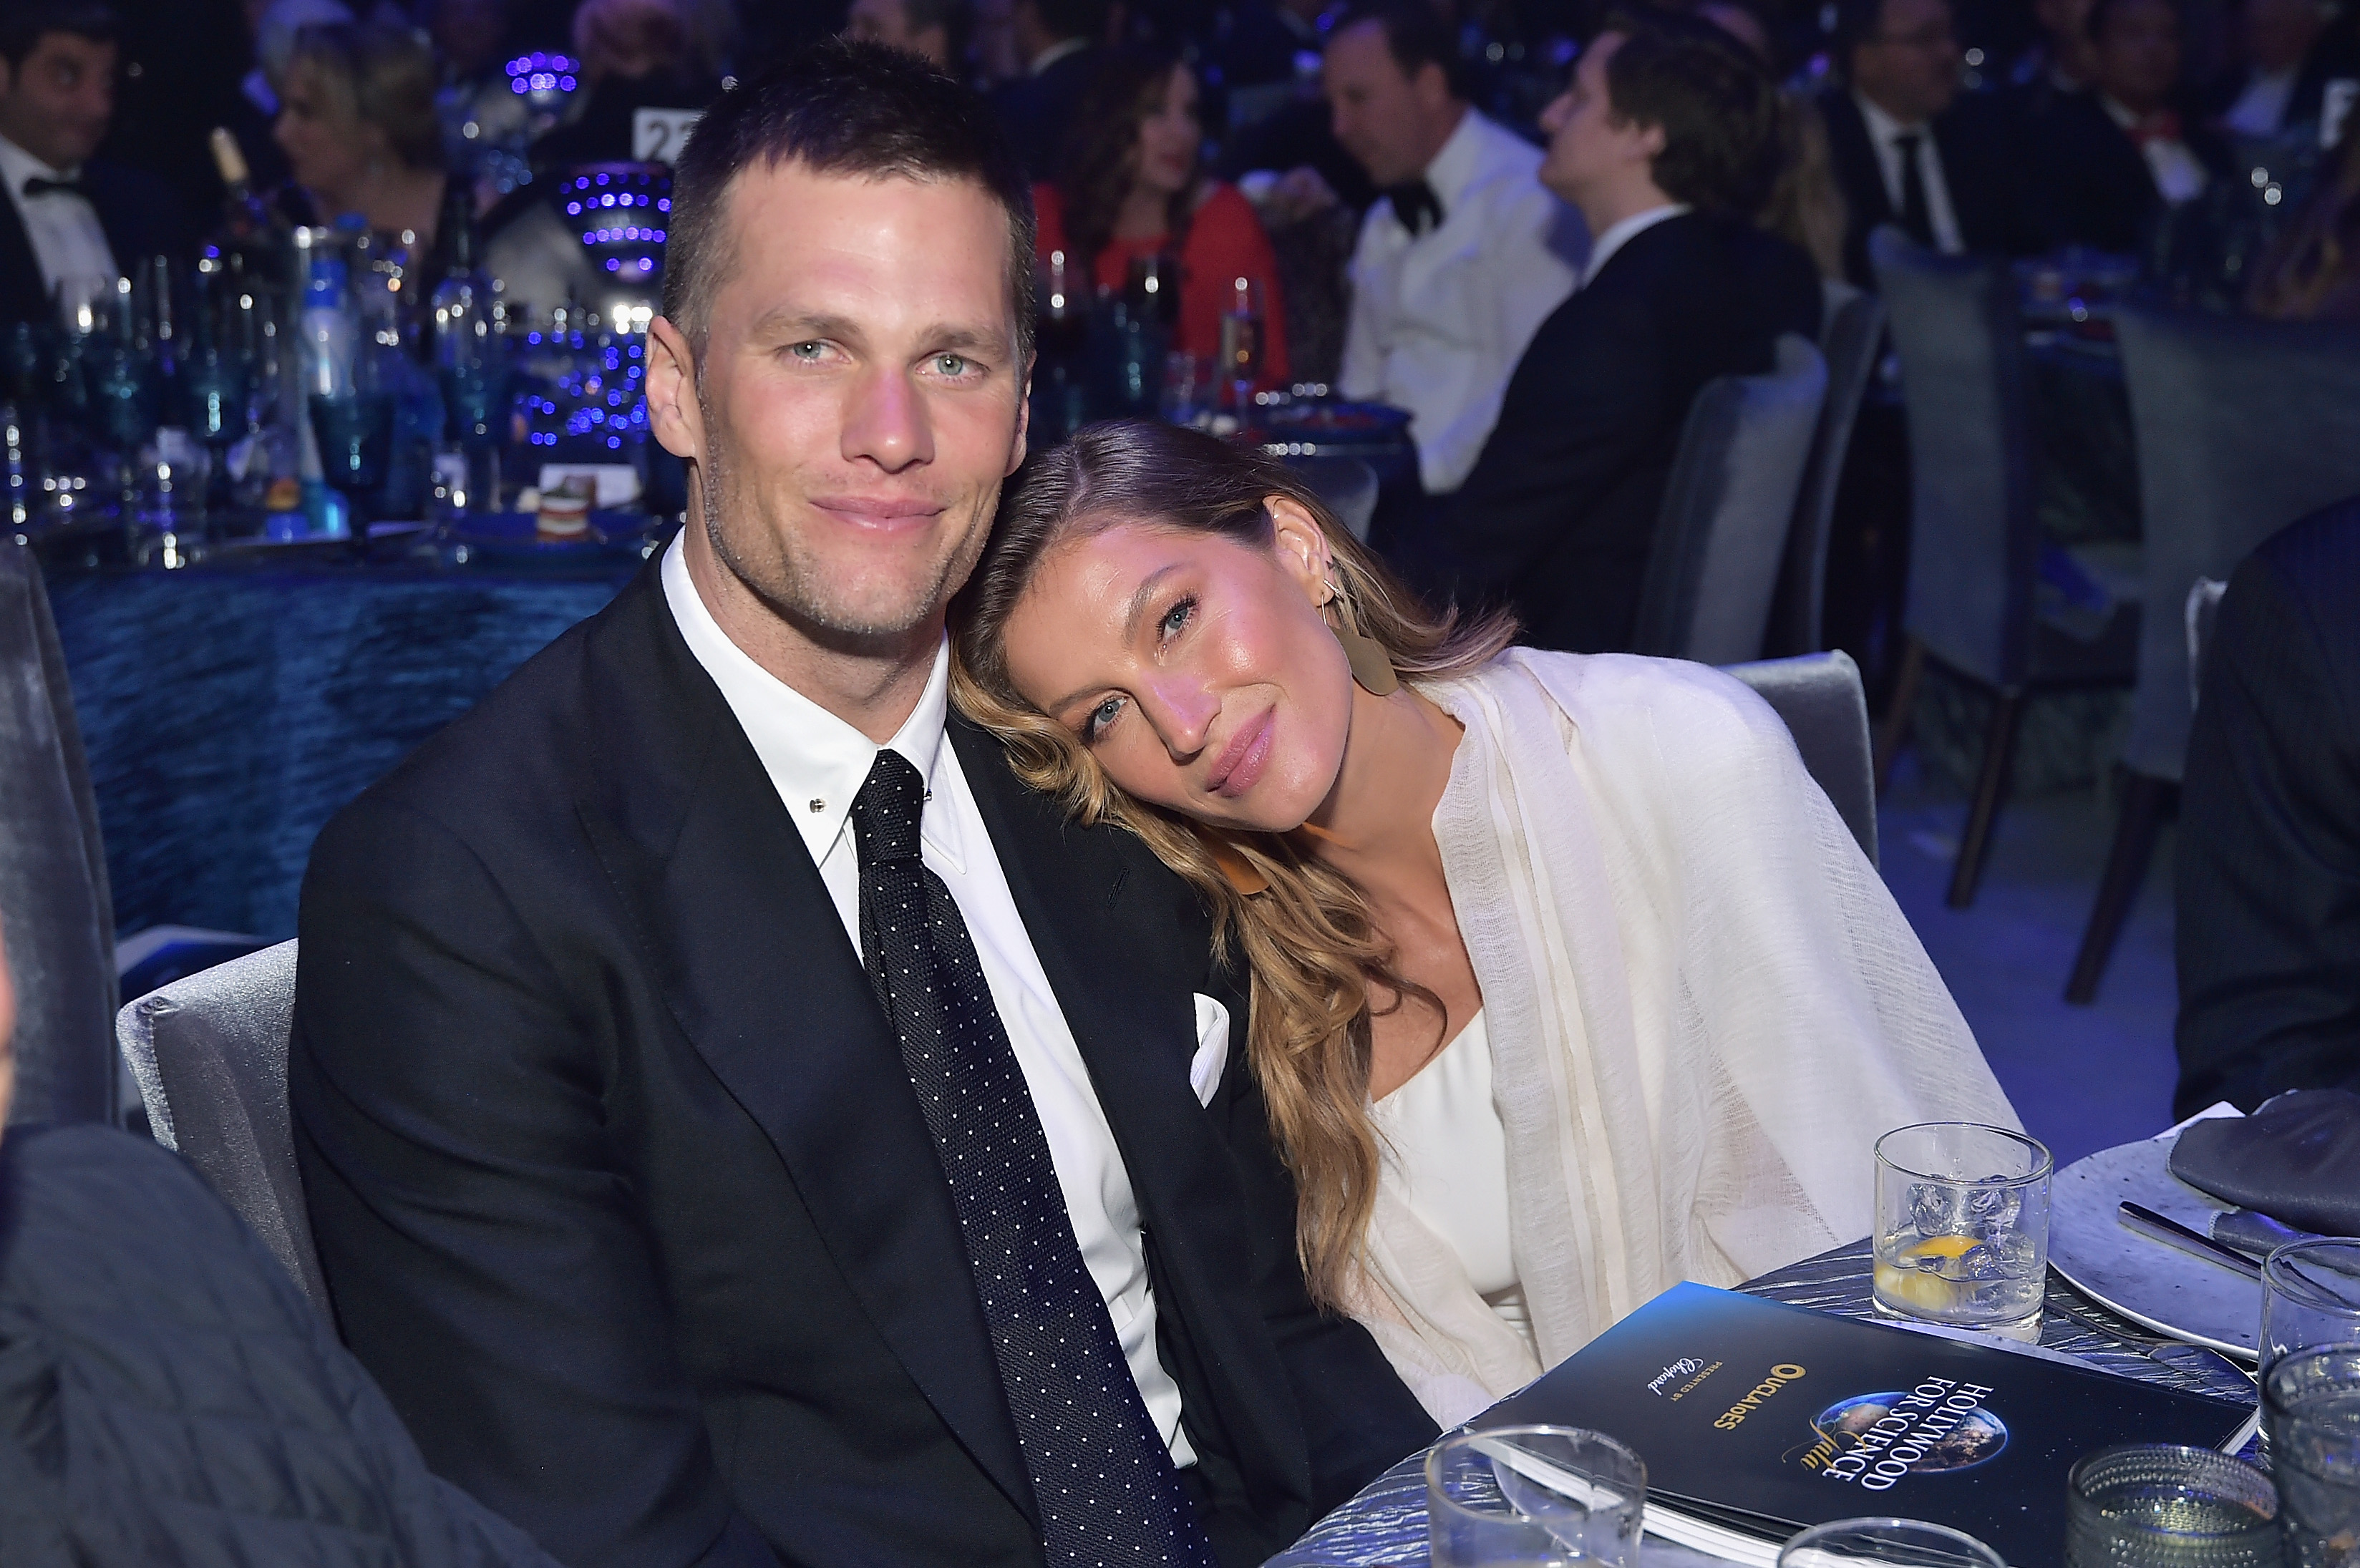 Tom Brady and Gisele Bündchen attend the UCLA IoES honors Barbra Streisand and Gisele Bundchen at the 2019 Hollywood for Science Gala on February 21, 2019 in Beverly Hills, California | Source: Getty Images